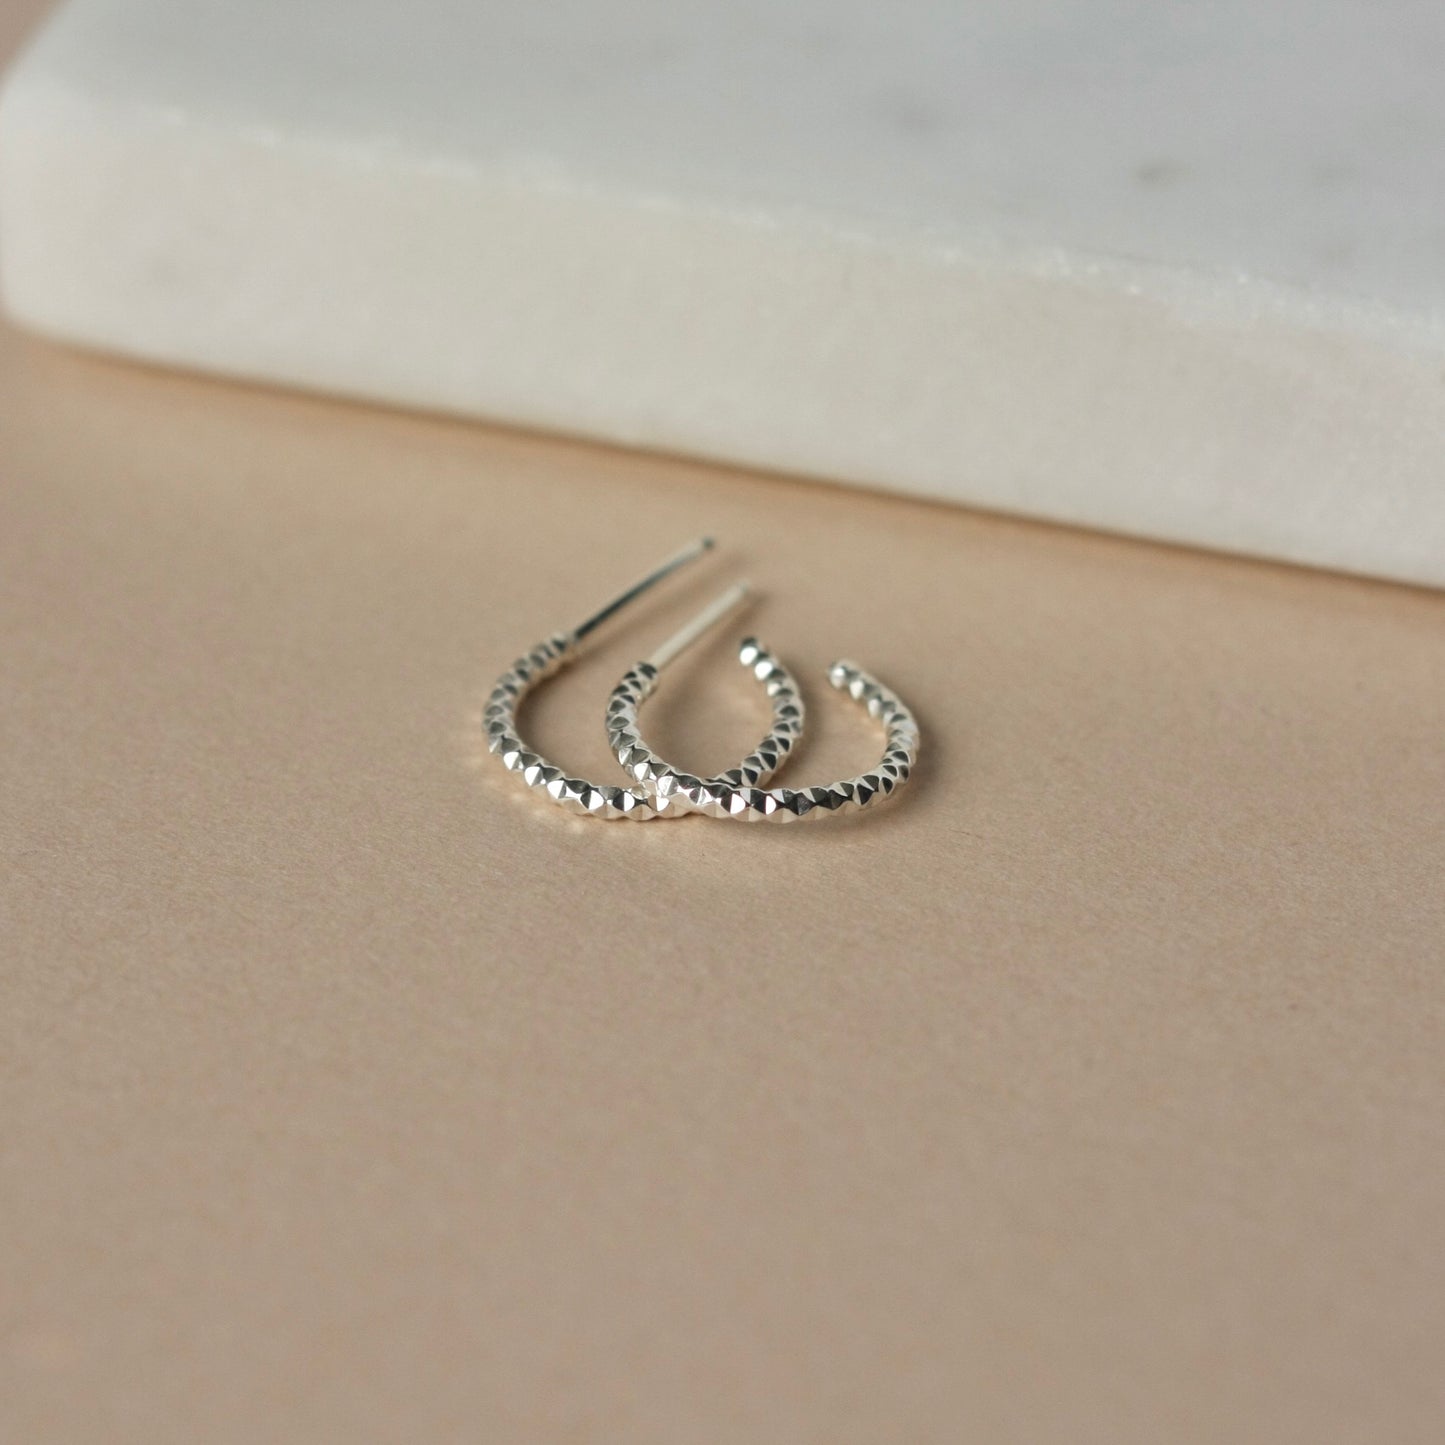 Small Sparkly 3/4 Silver Hoop Earrings